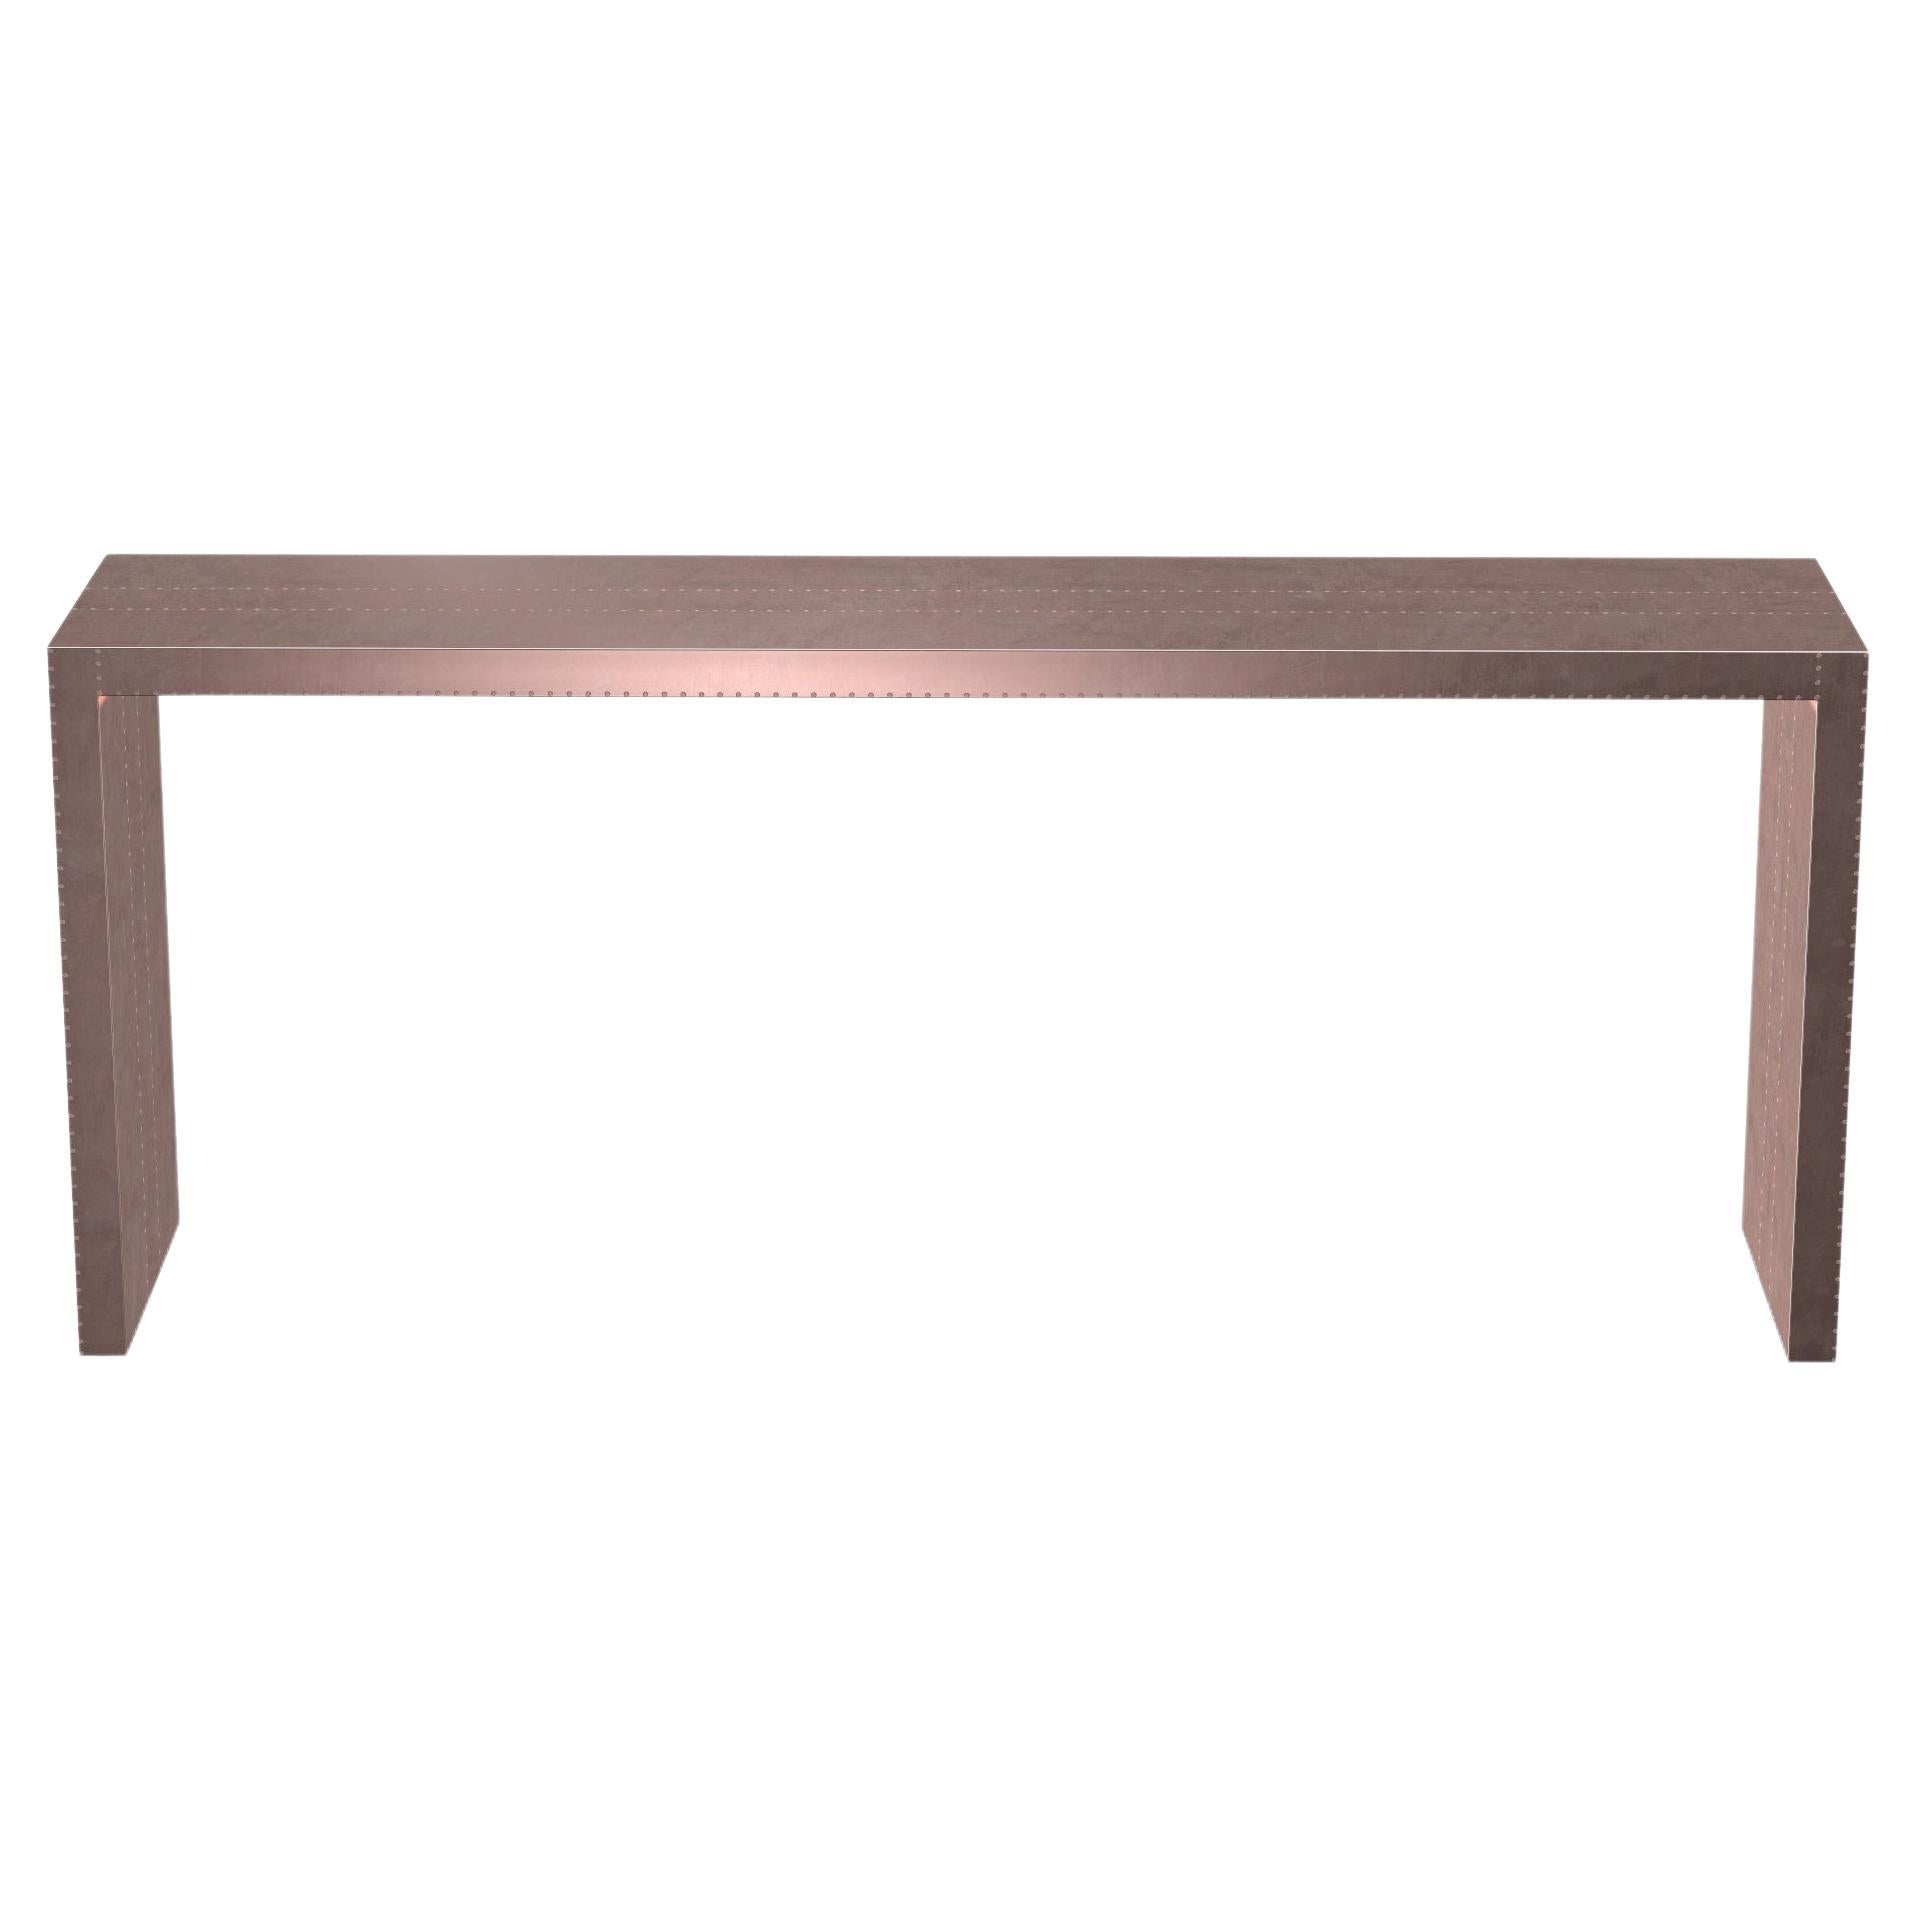 Art Deco Coffee and Cocktail Tables Rectangular Console in Smooth Copper 